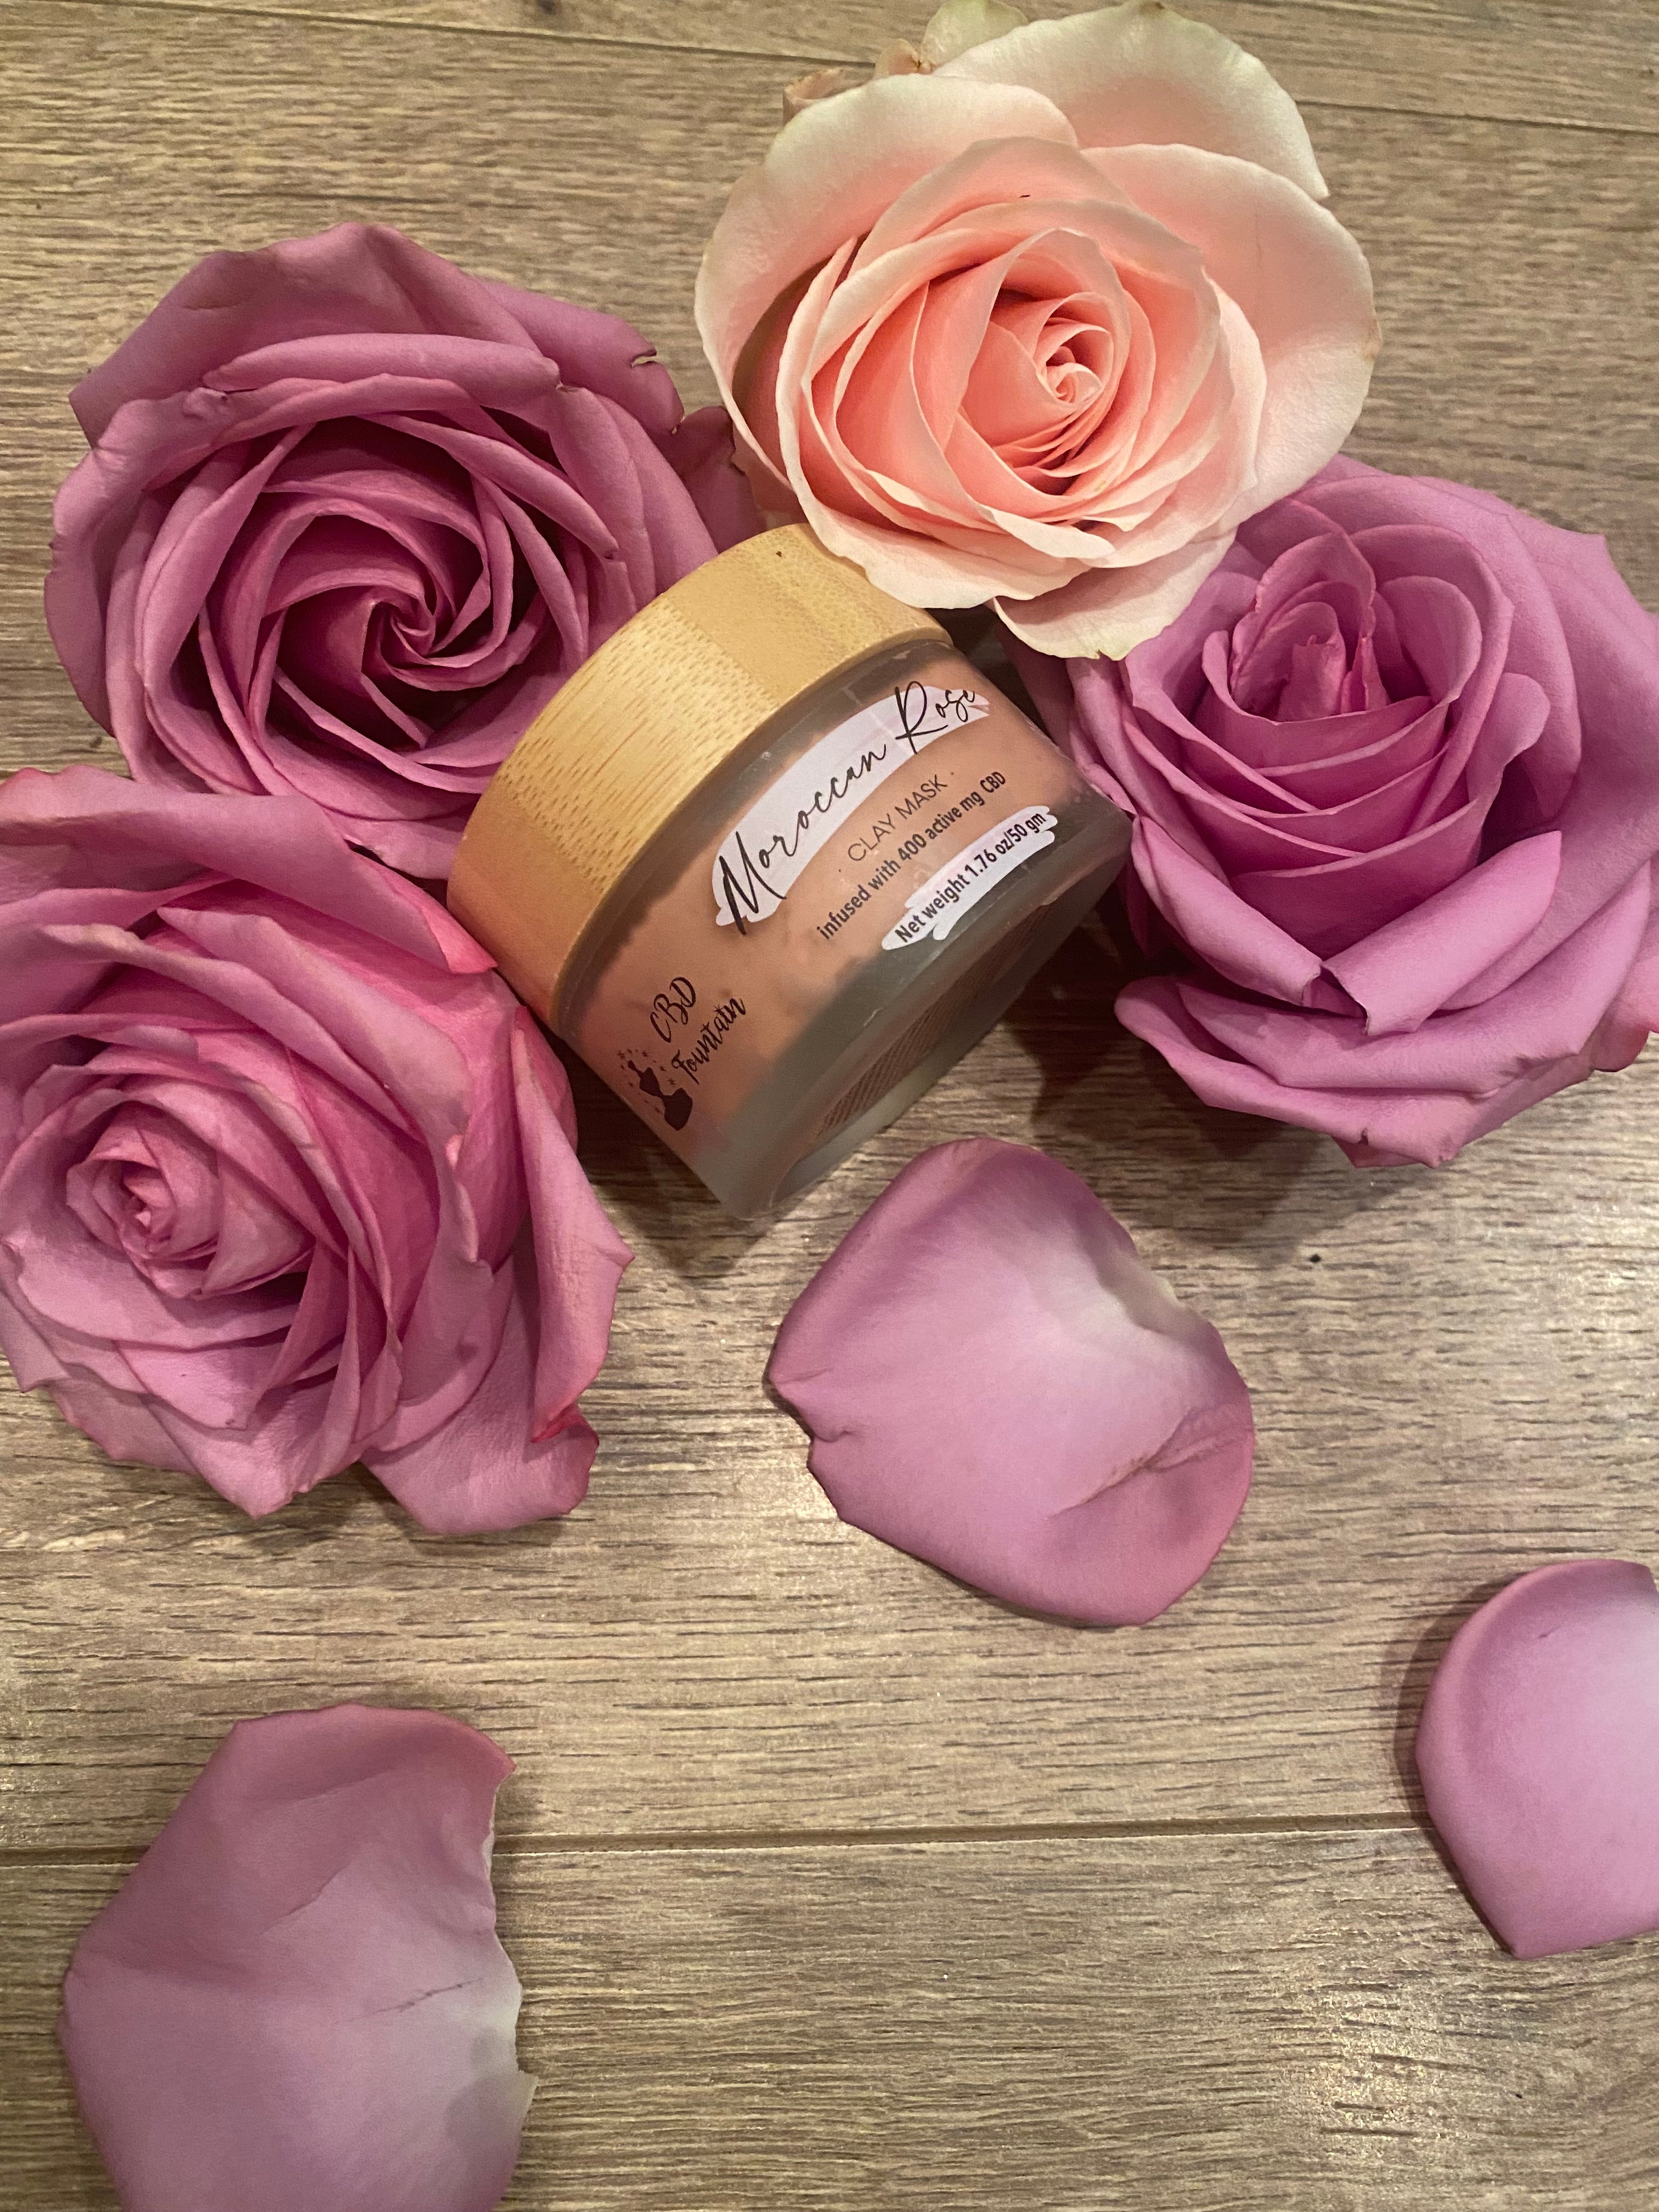 Moroccan Rose Clay Mask